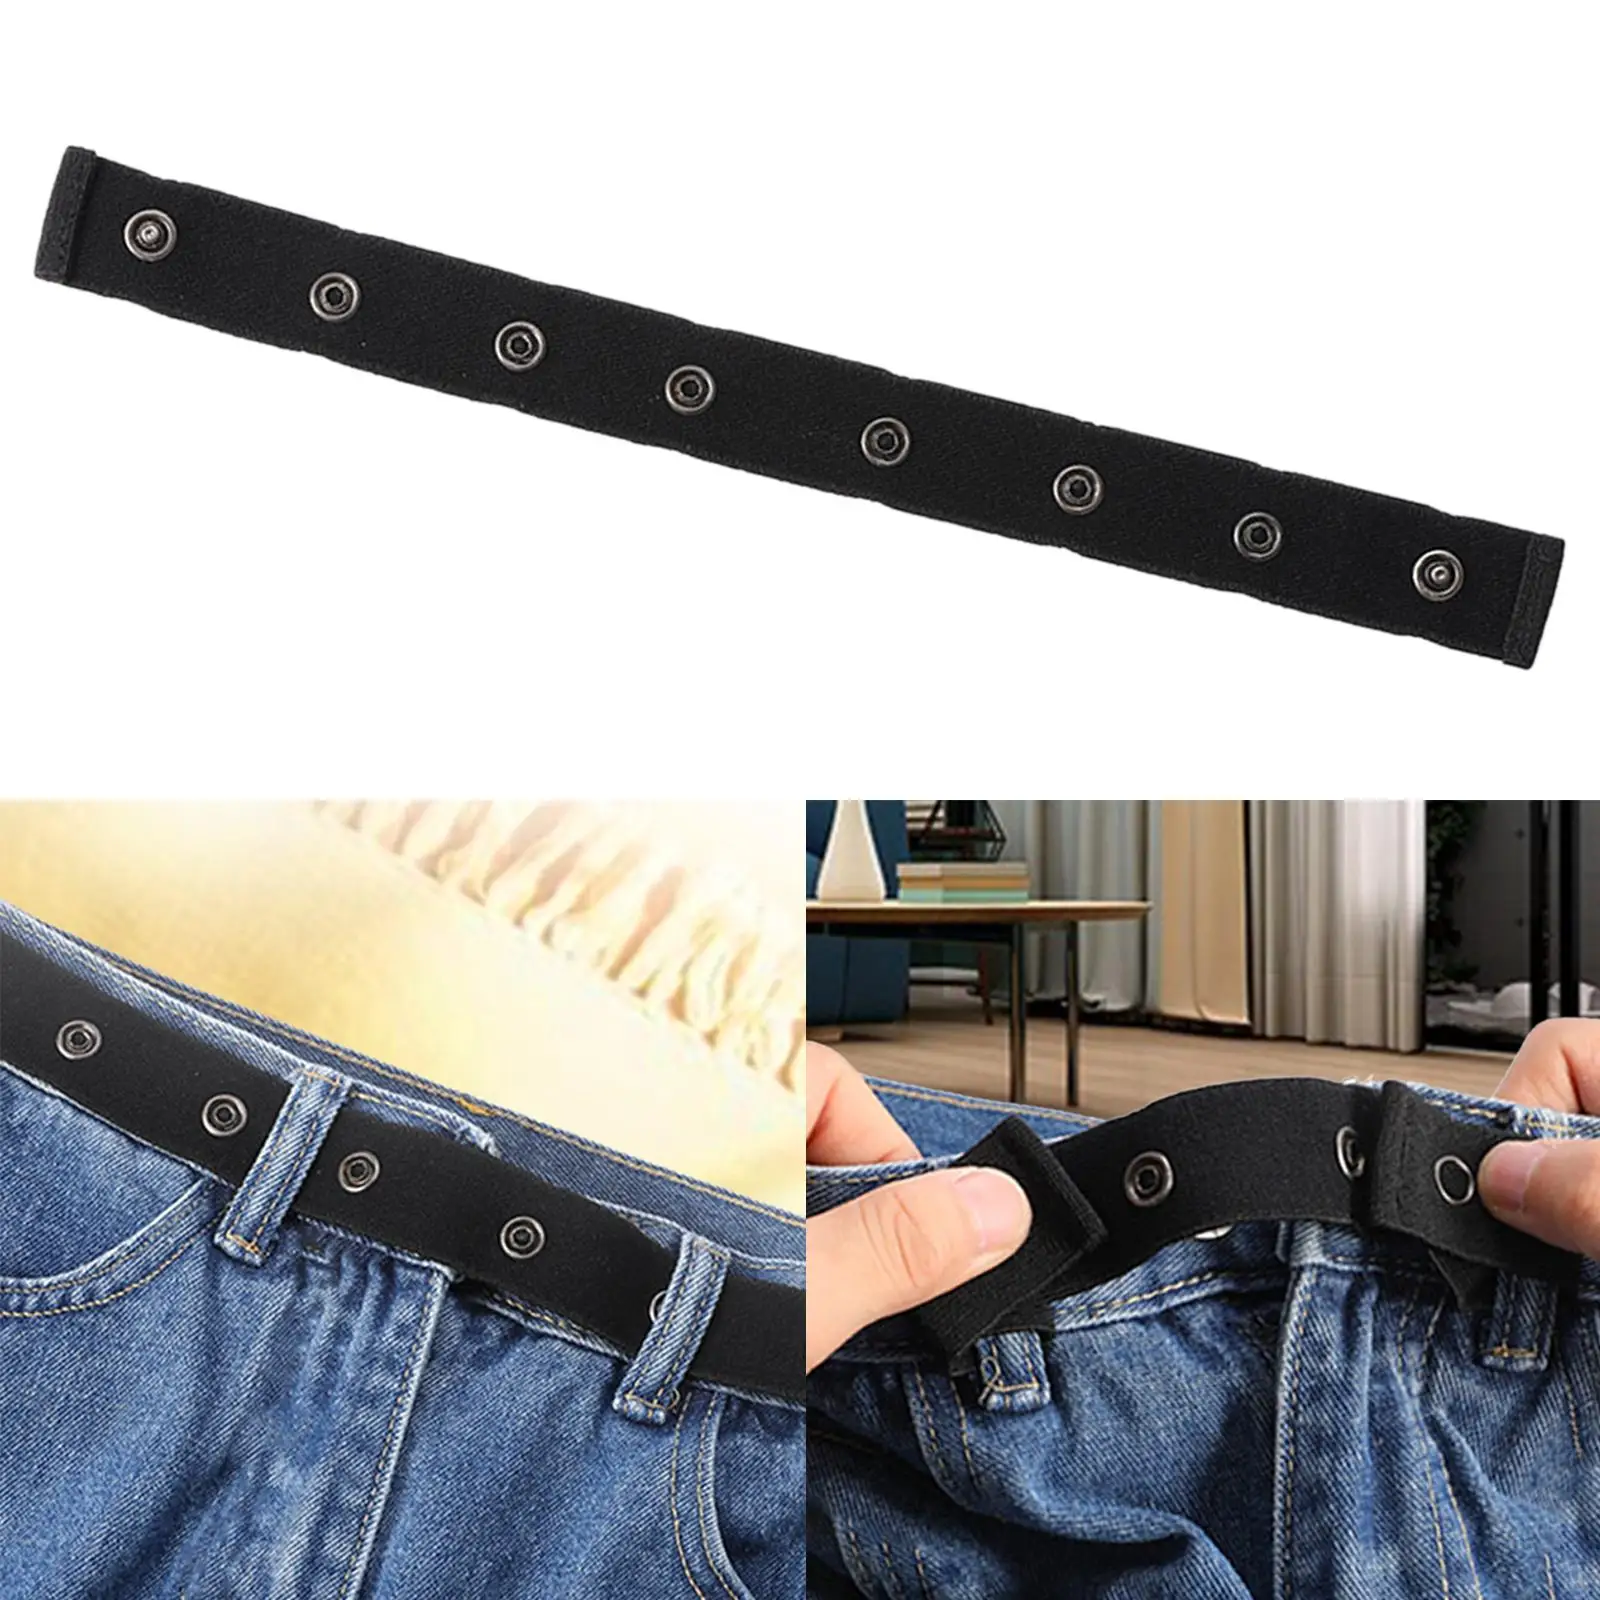 Elastic Belt Buckle Free Stretchy Unisex Waistband Waist Belt Adjustable Buckless Belt Invisible Without Buckle for Dress Pants